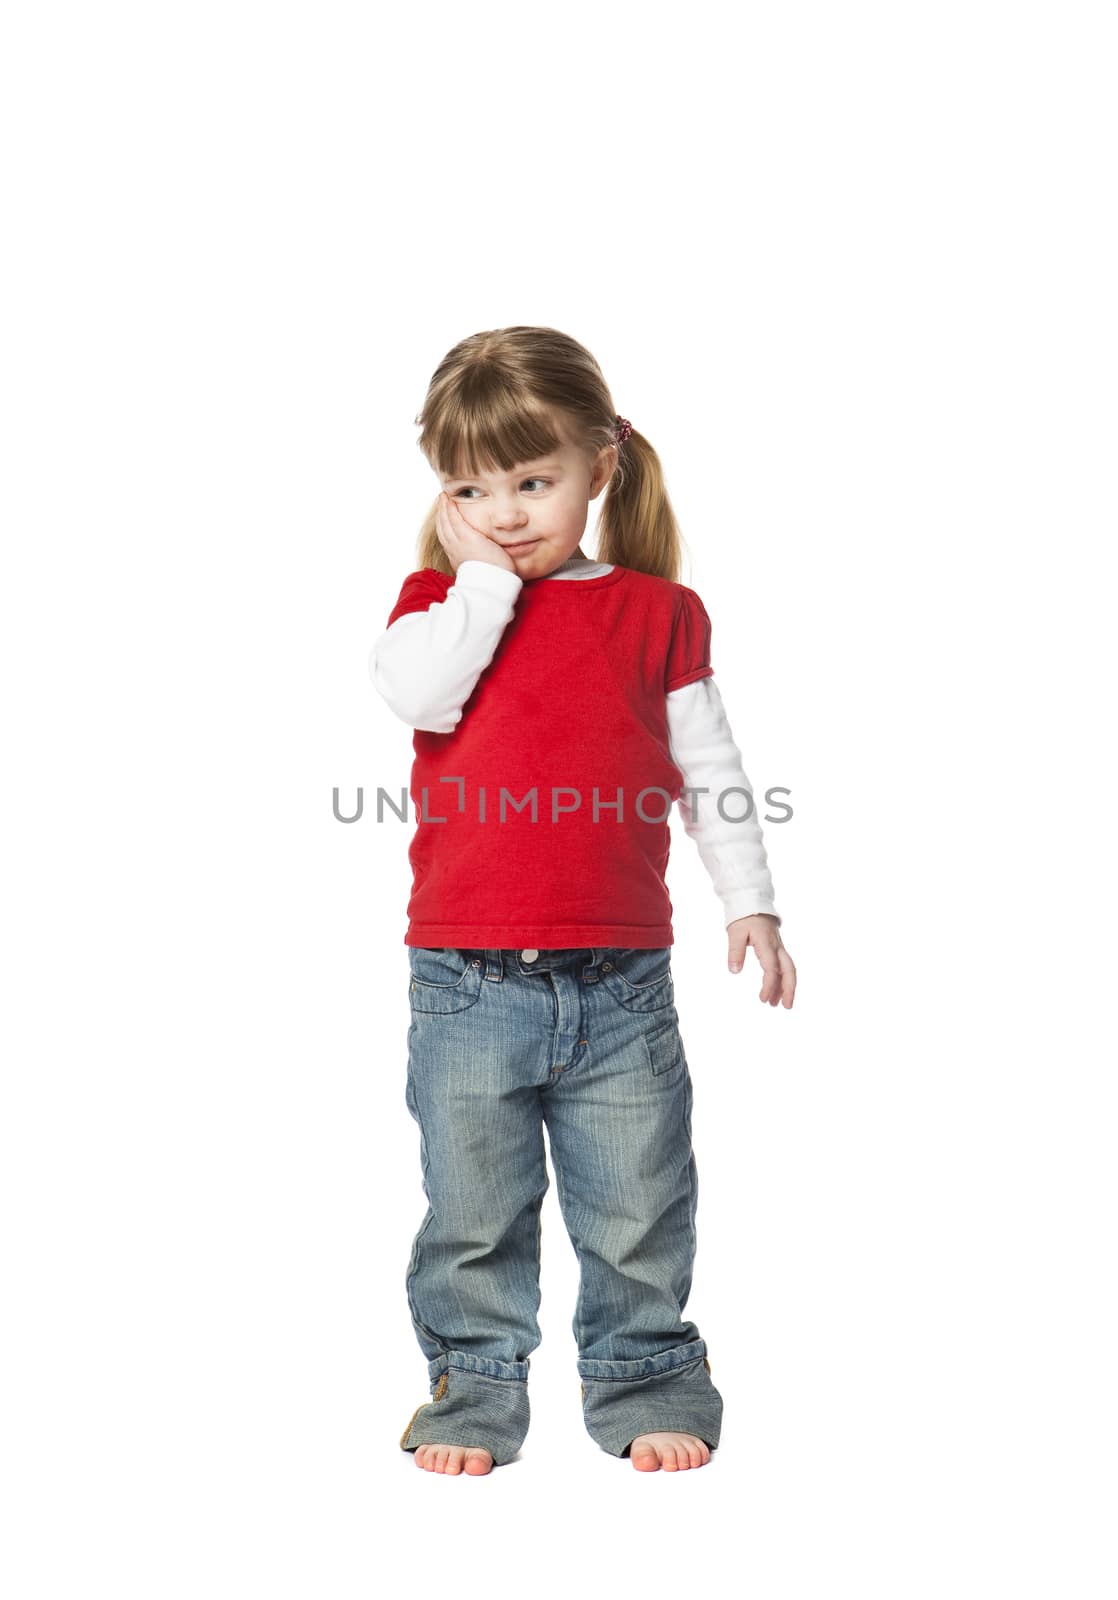 Two years old Girl isolated on white background